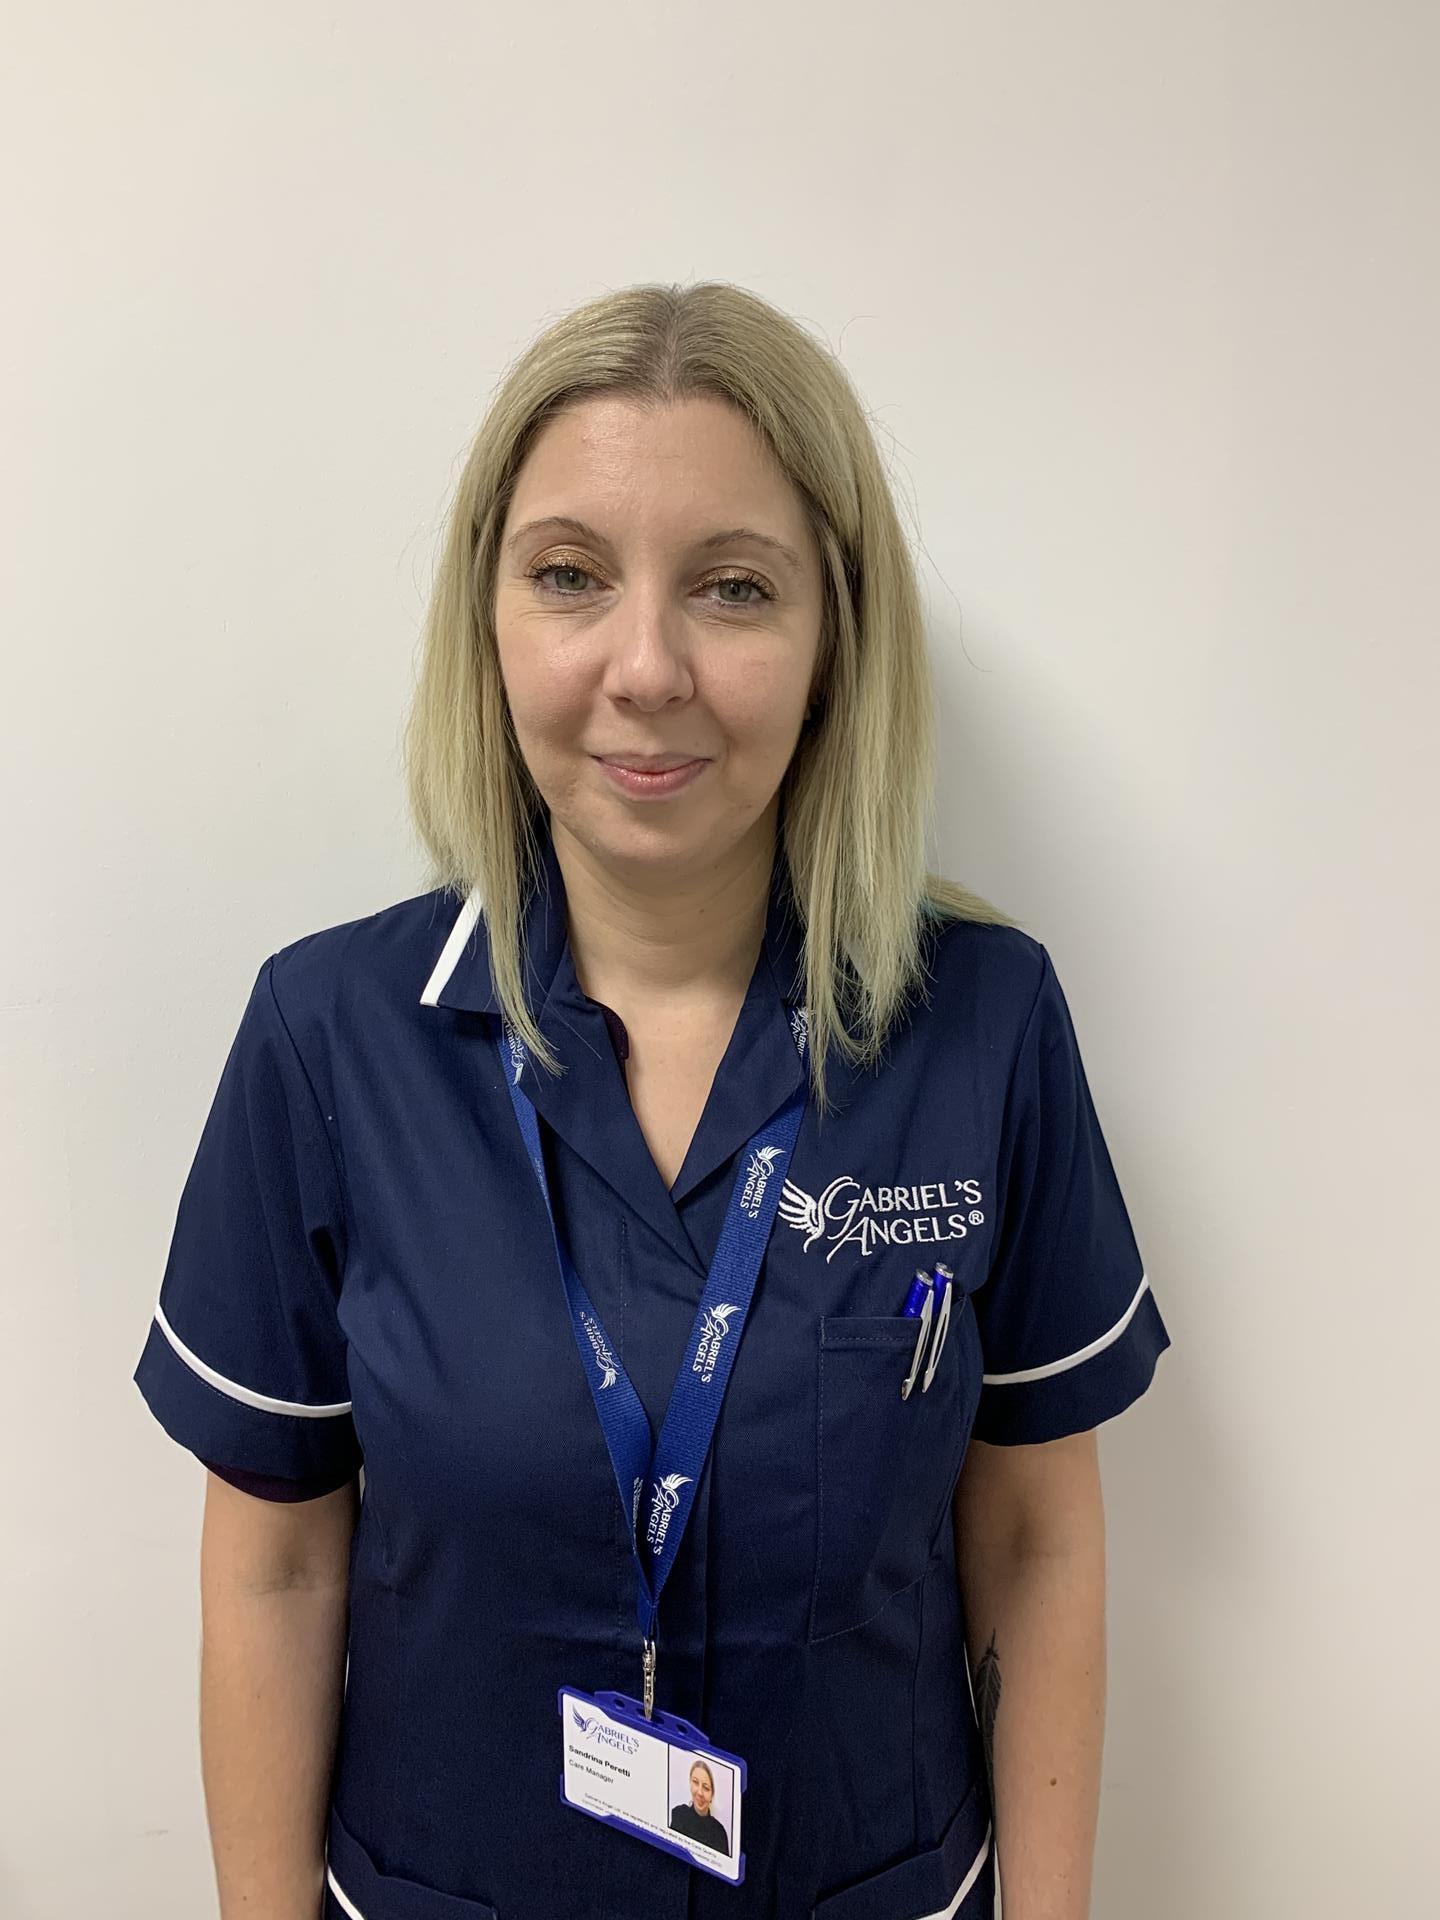 Sandrina Perretti joins the Gabriel’s Angels family as a Care Manager